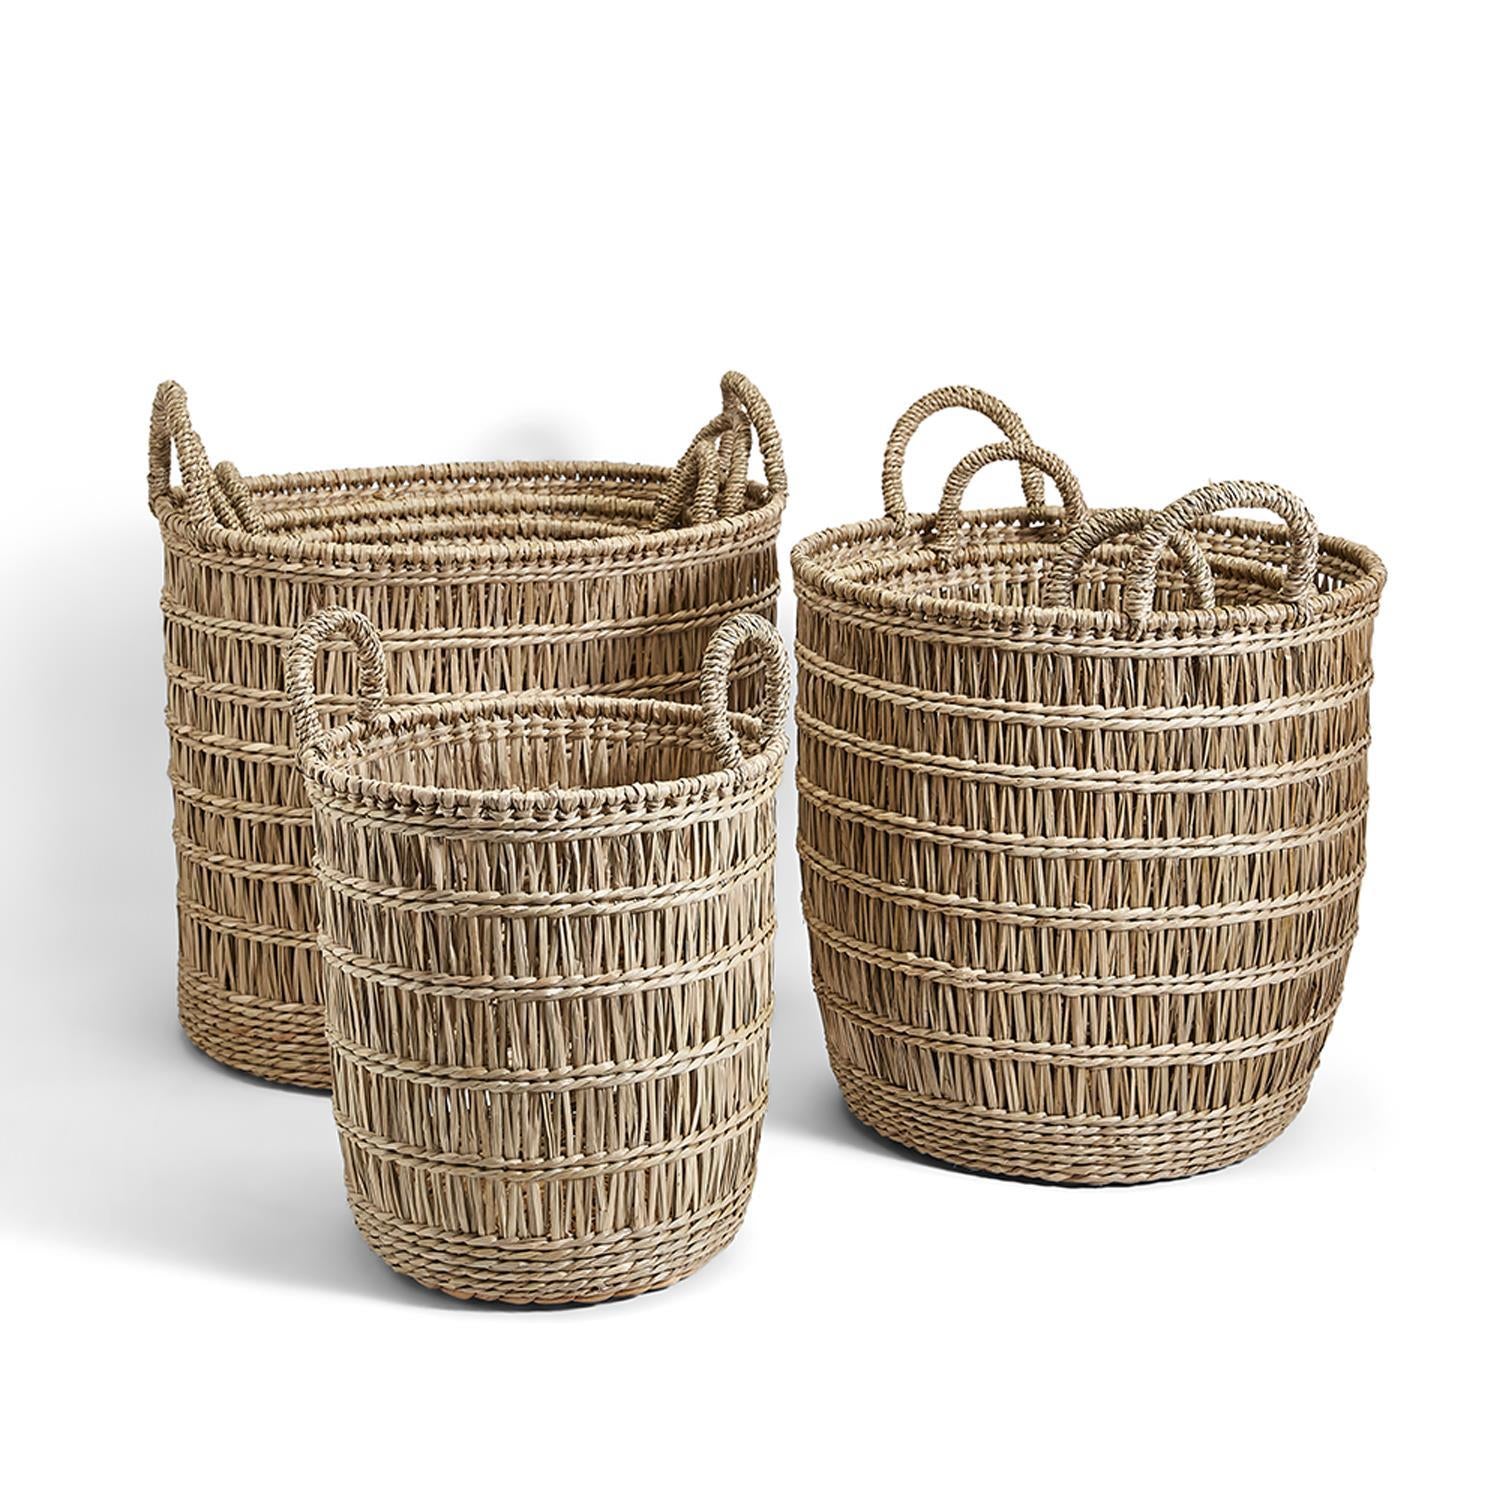 Two's Company S/6 Hand-Crafted Seagrass Baskets Asst 2 Styles